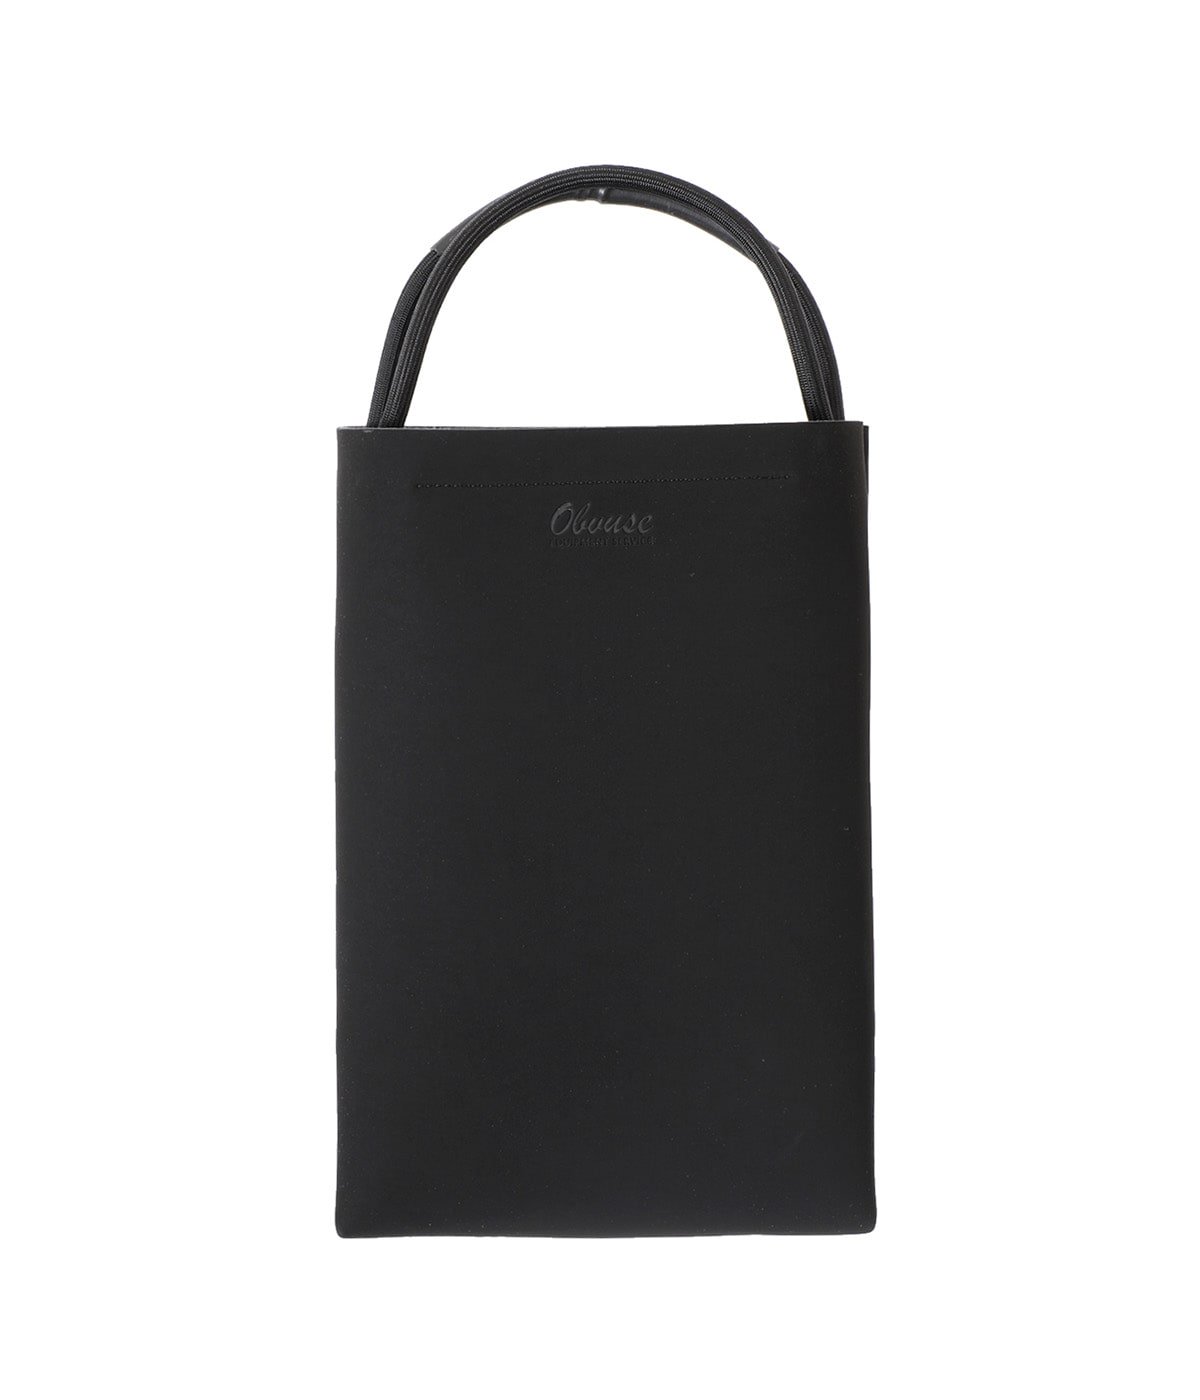 GUM LEATHER TOTE MS | Obvuse(オビューズ) / バッグ トートバッグ